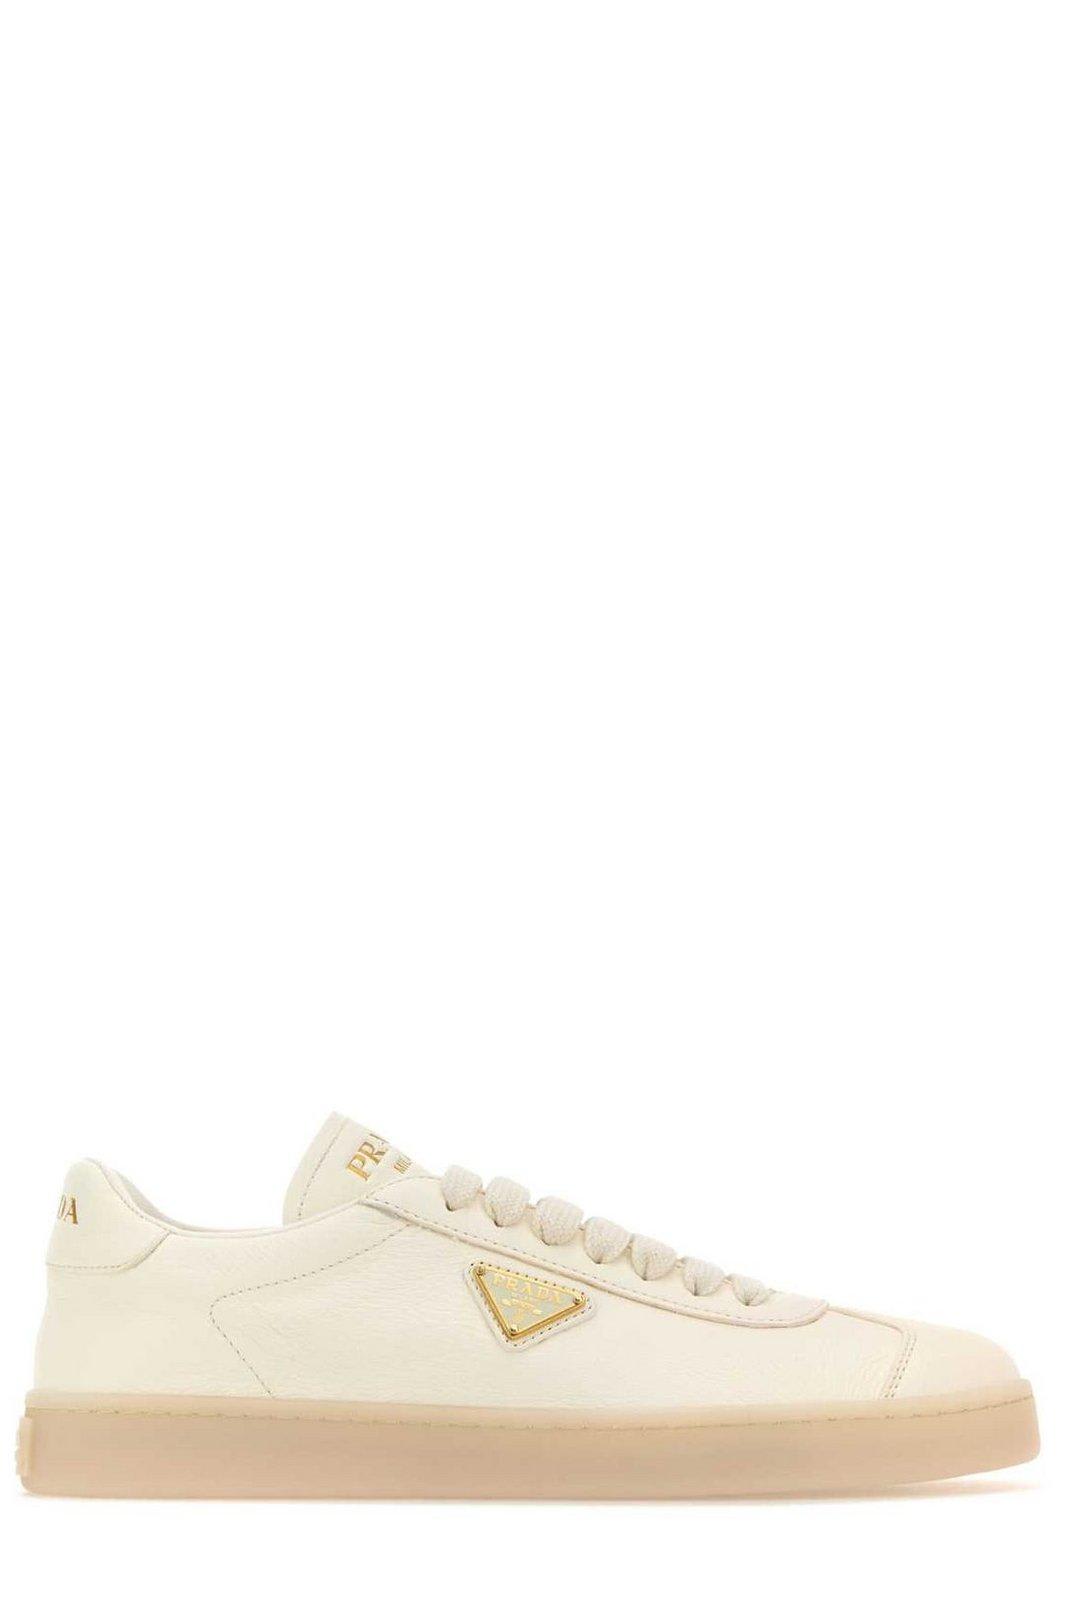 Prada Downtown Lace-up Sneakers